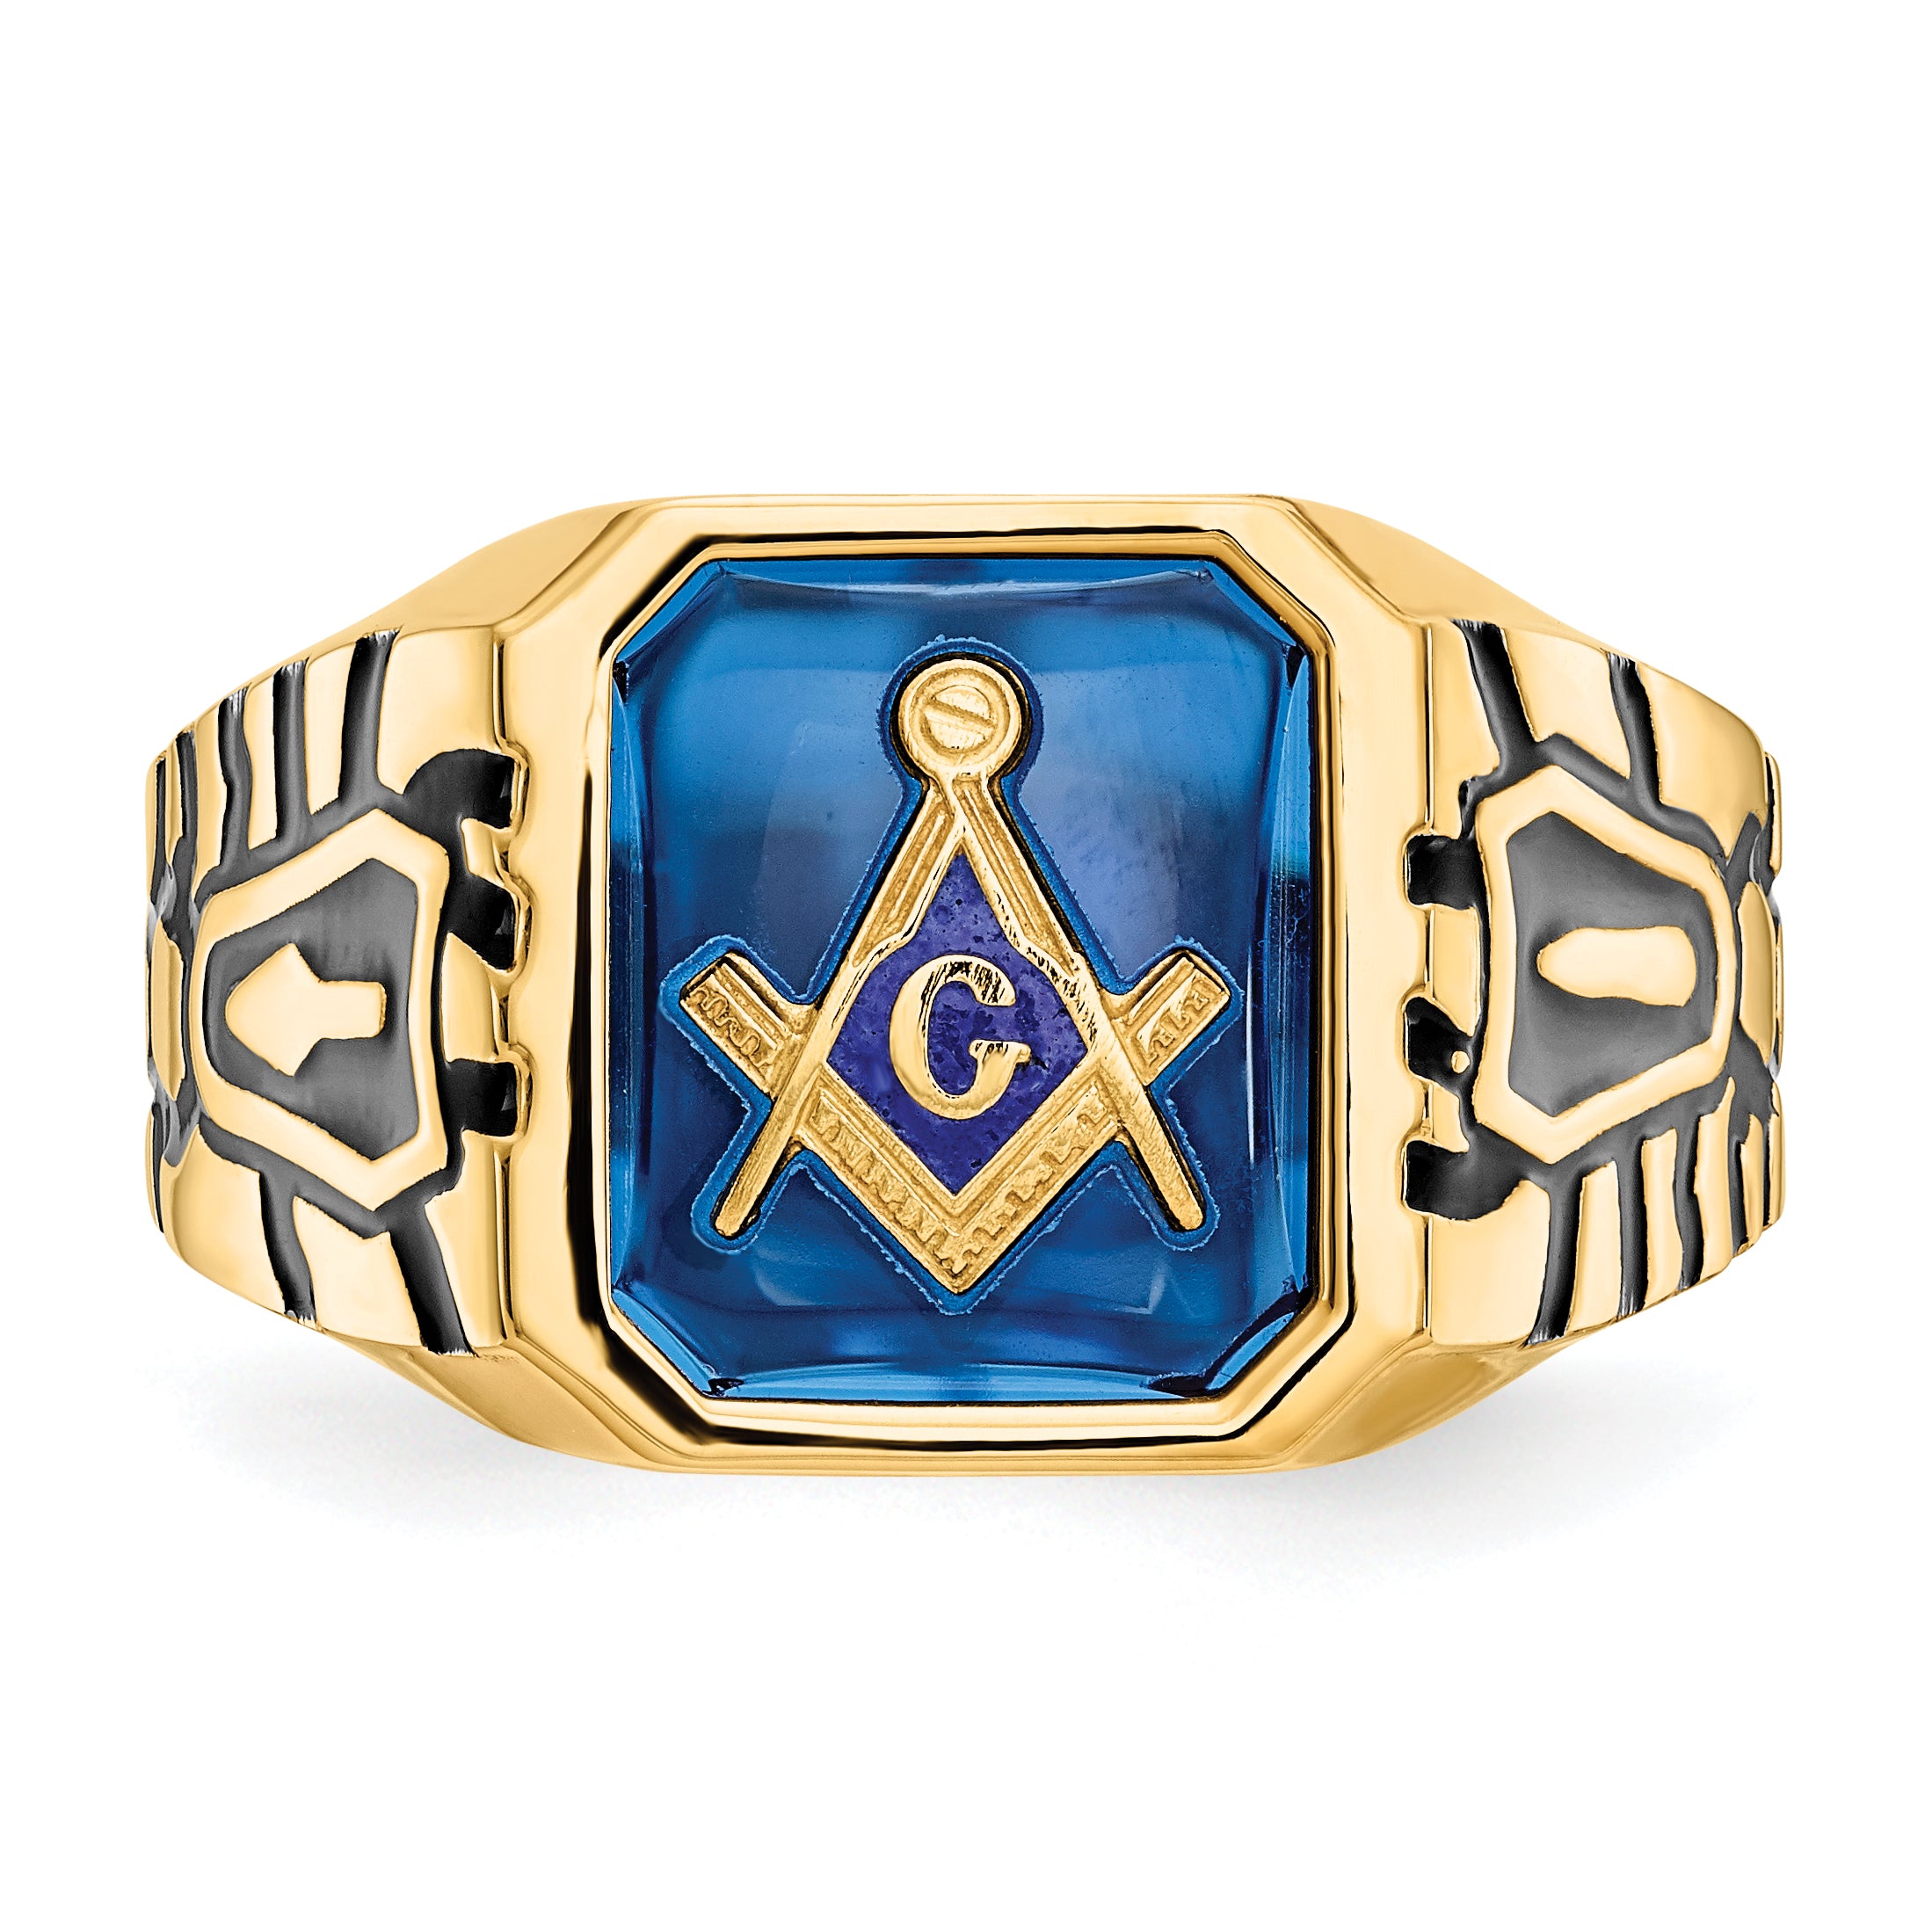 10k Men's Polished, Antiqued and Grooved with Imitation Blue Spinel Masonic Ring